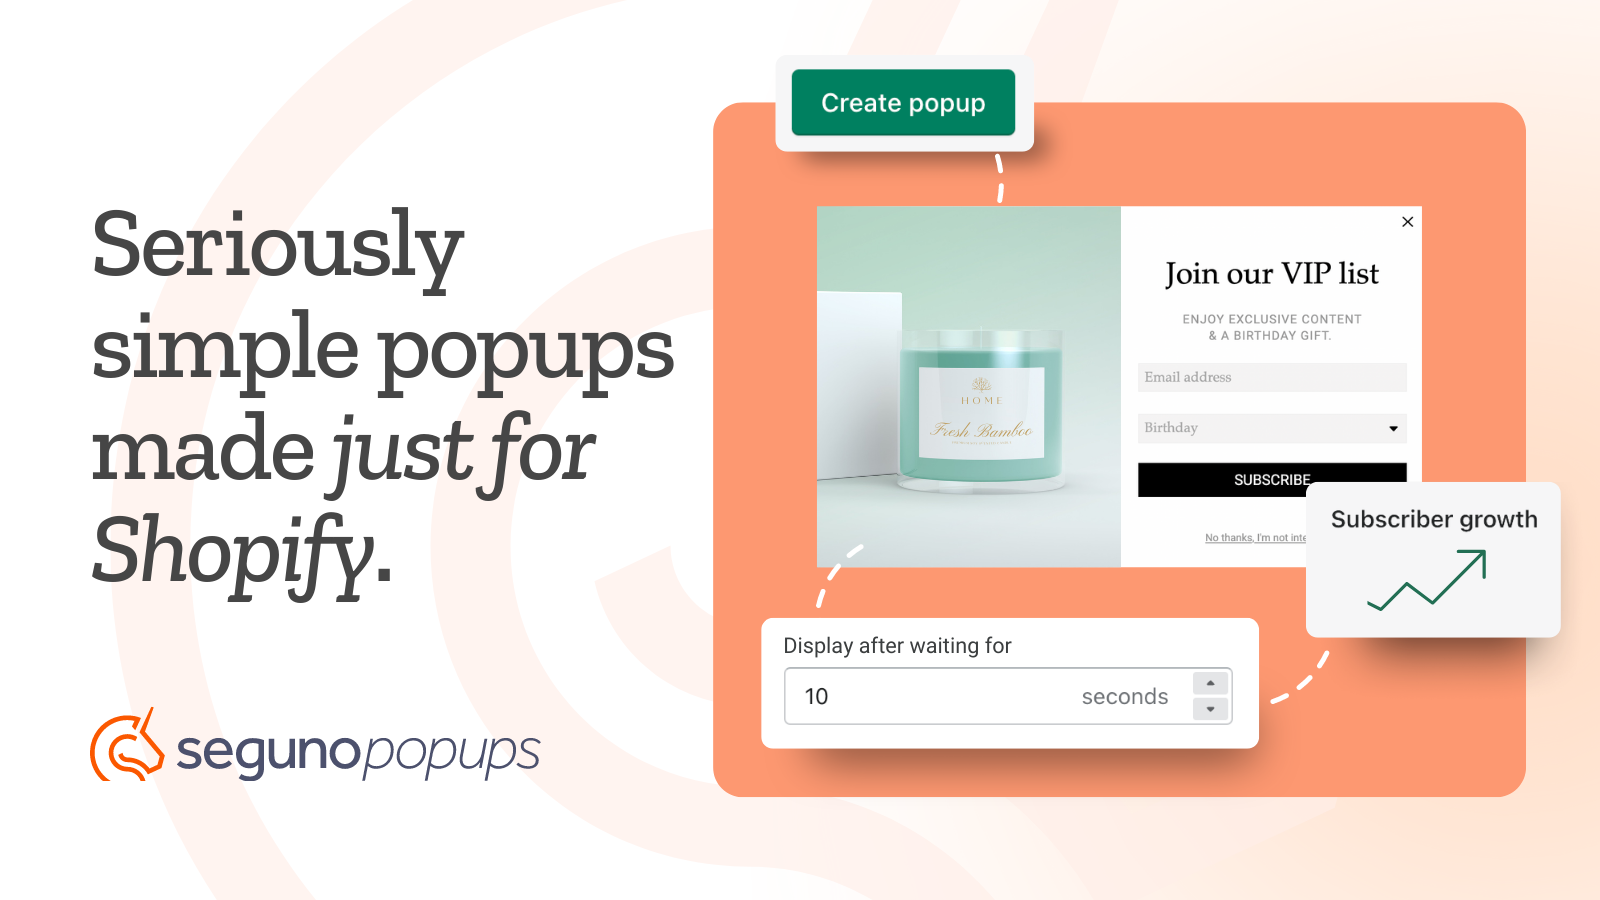 Grow email and SMS lists. Design beautiful popup forms in Canva.